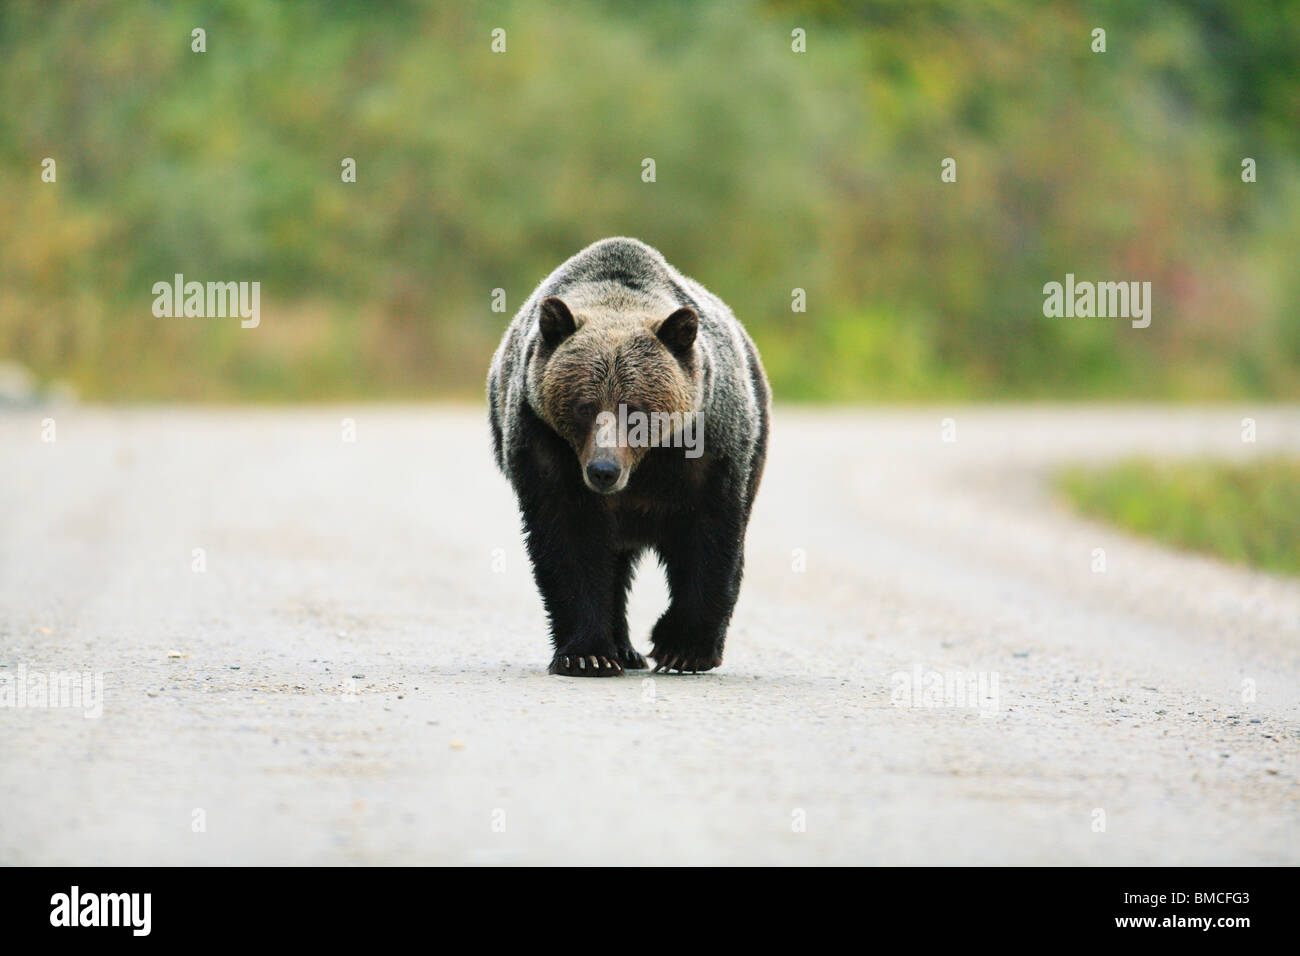 Big grizzly bear walking down a forest service backcountry dirt road in British Columbia, Canada Stock Photo